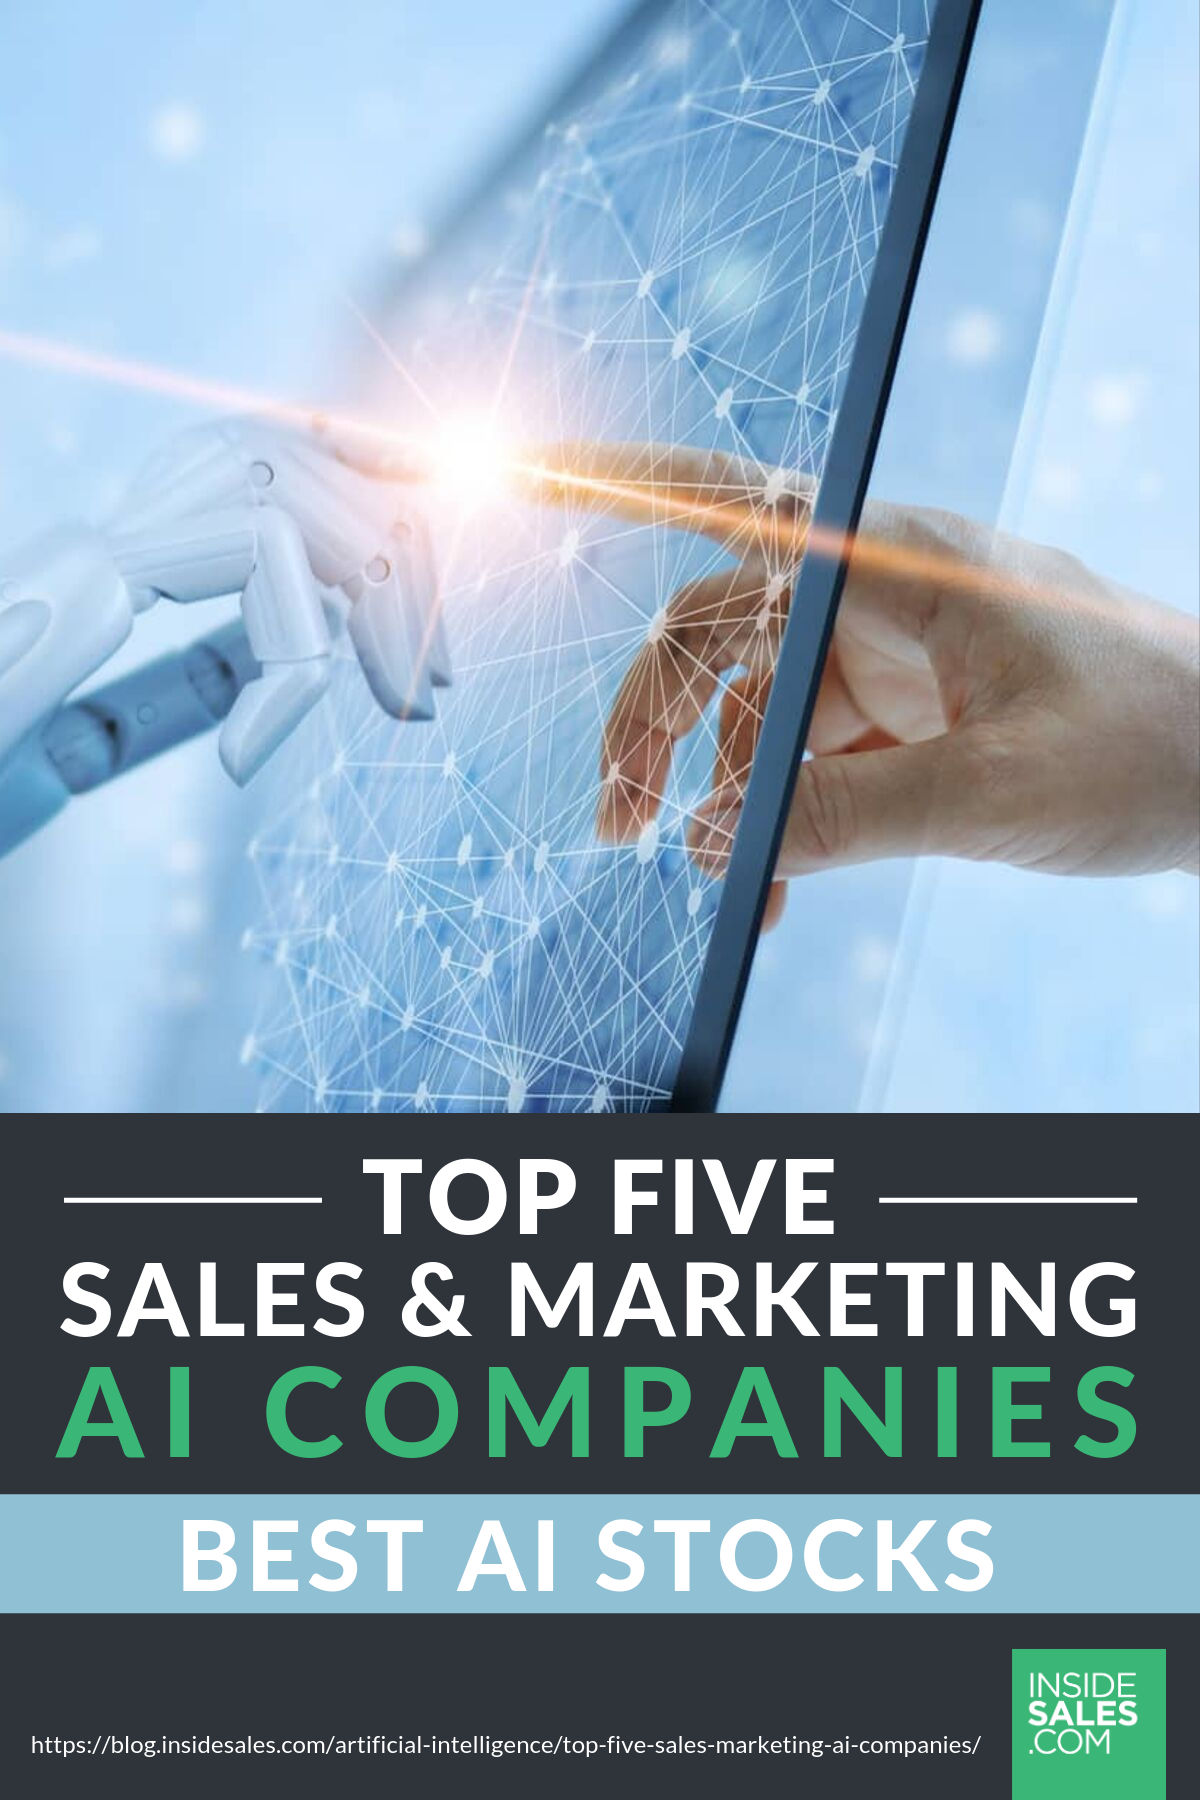 Top Five Sales And Marketing AI Companies | Best AI Stocks https://www.insidesales.com/blog/artificial-intelligence/top-five-sales-marketing-ai-companies/